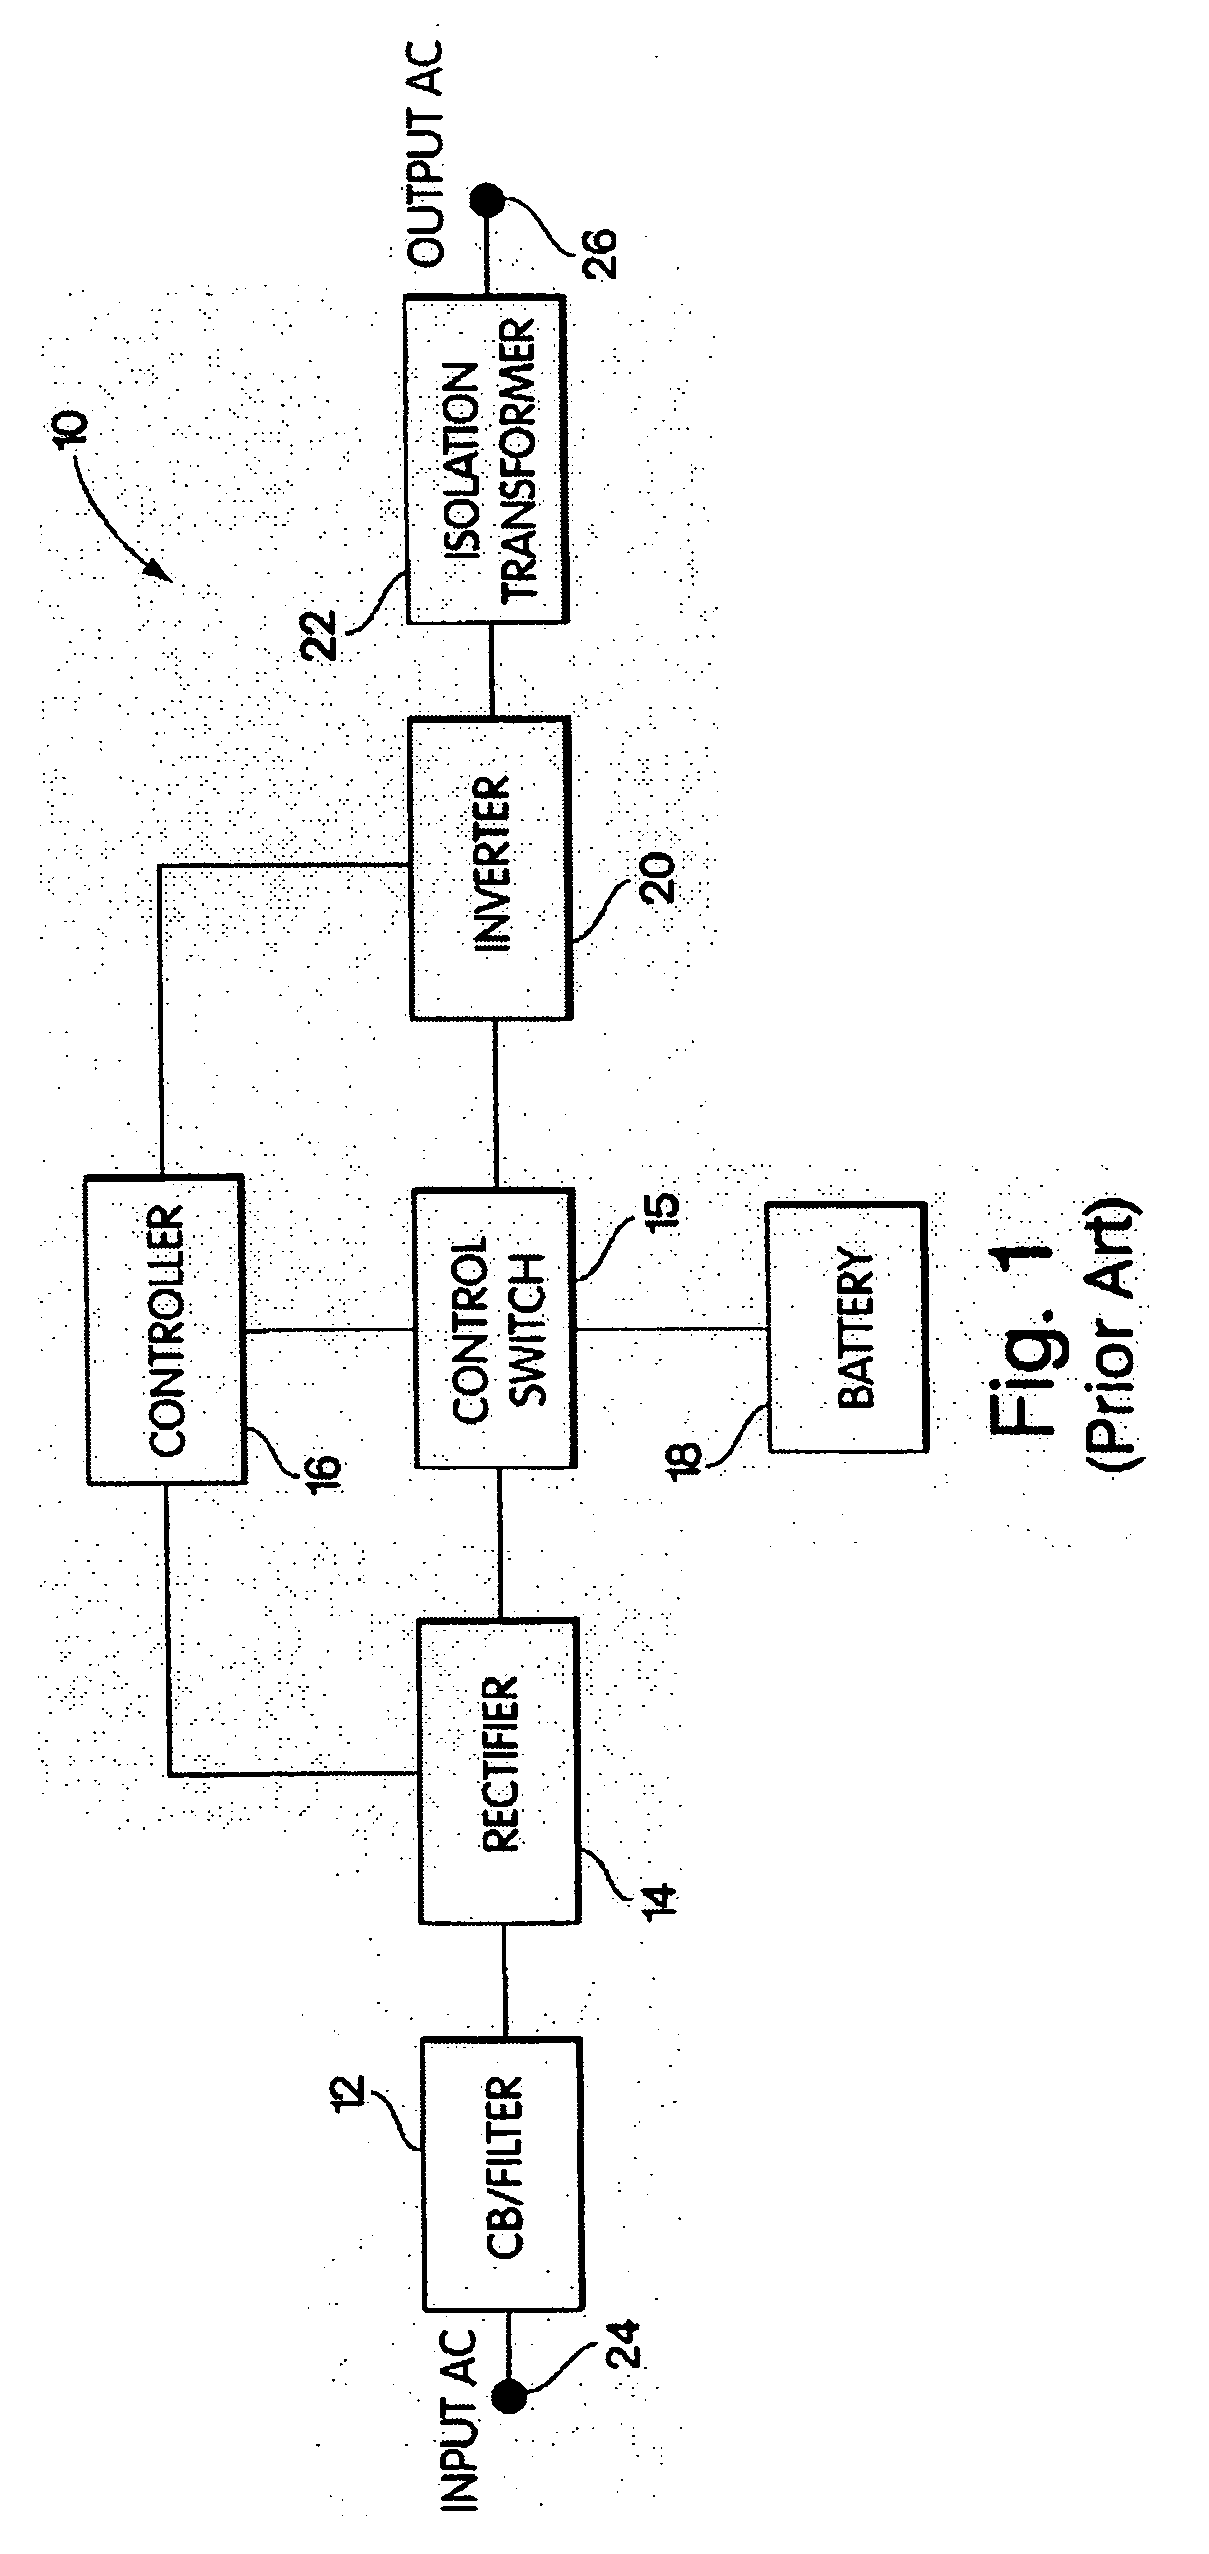 Methods and apparatus for providing uninterruptible power